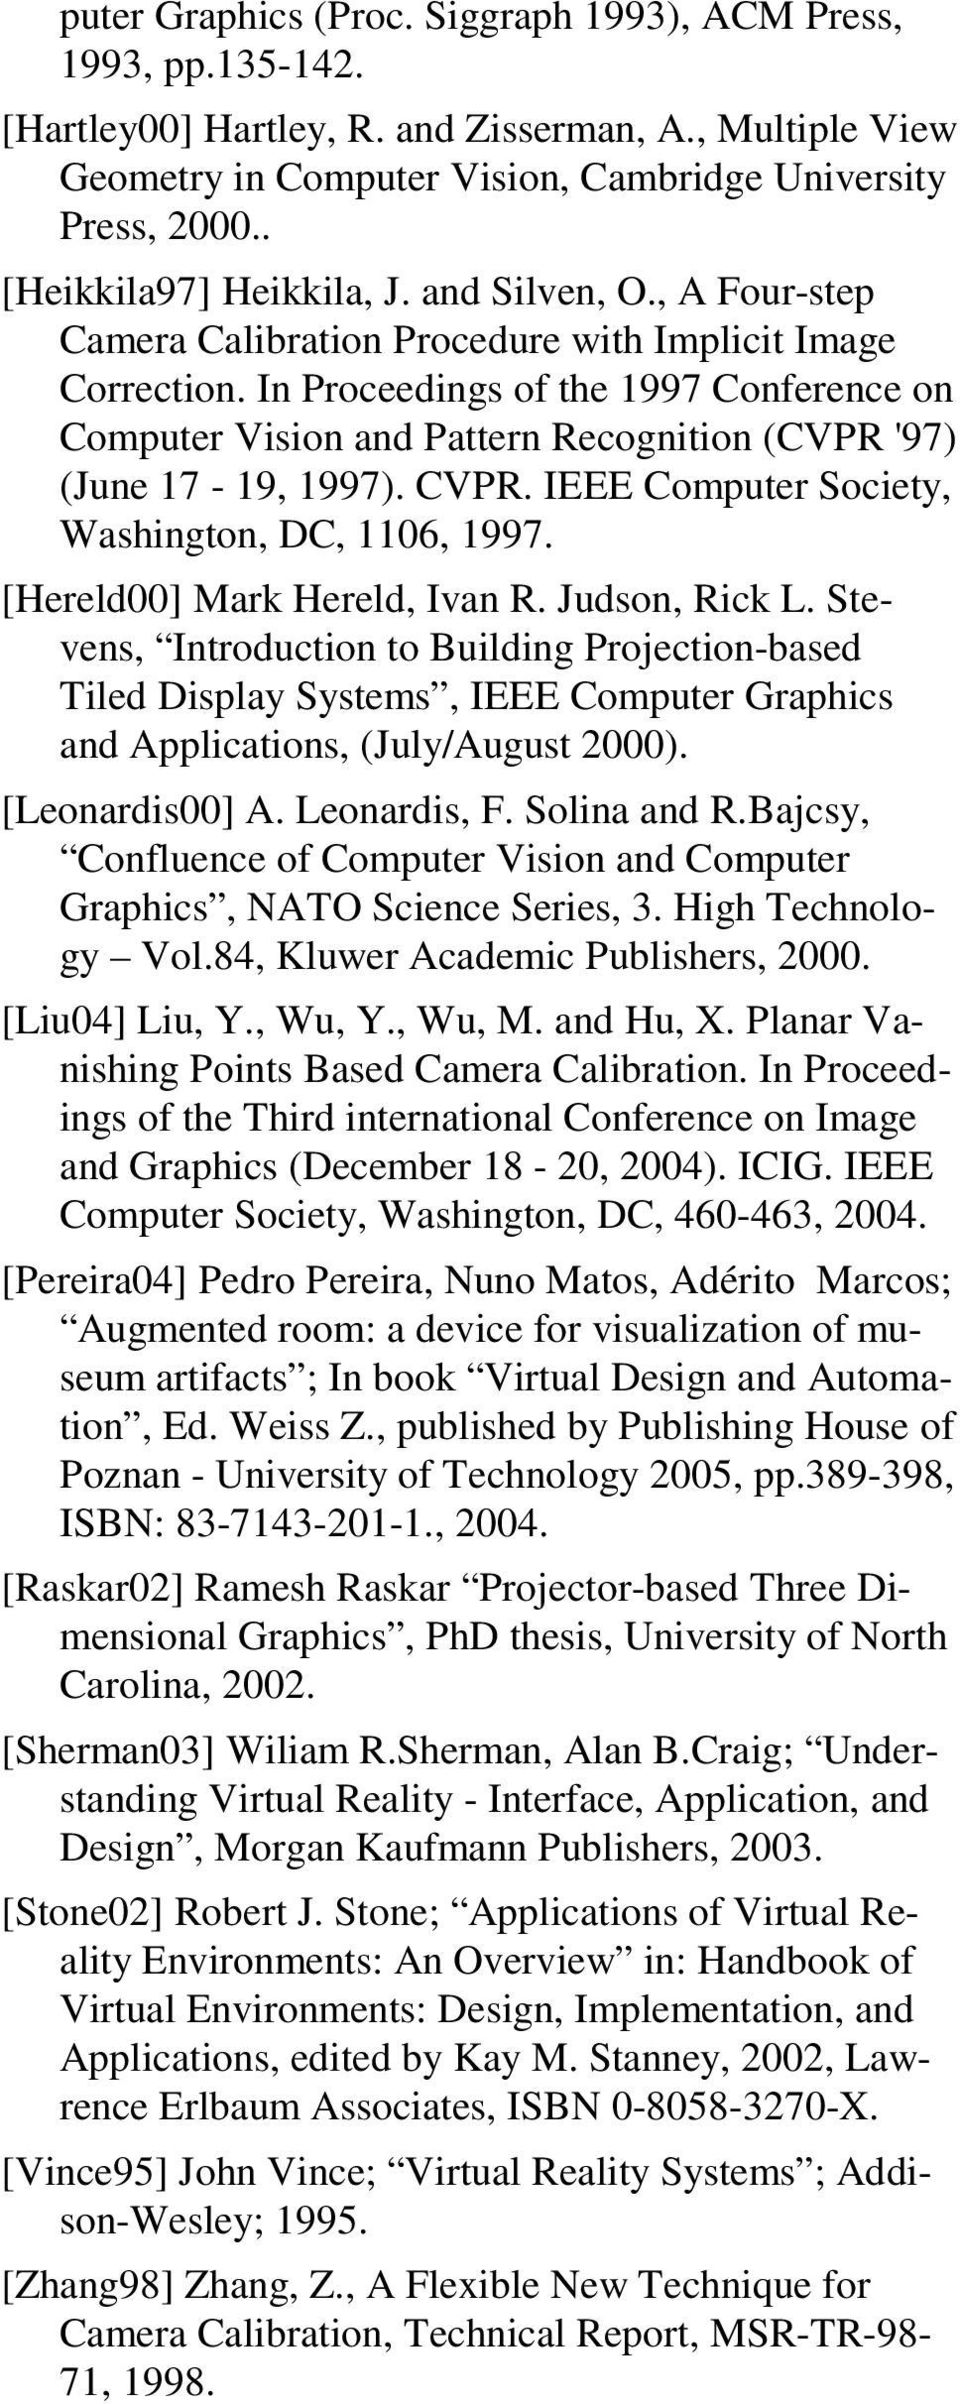 In Proceedings of the 1997 Conference on Computer Vision and Pattern Recognition (CVPR '97) (June 17-19, 1997). CVPR. IEEE Computer Society, Washington, DC, 1106, 1997. [Hereld00] Mark Hereld, Ivan R.